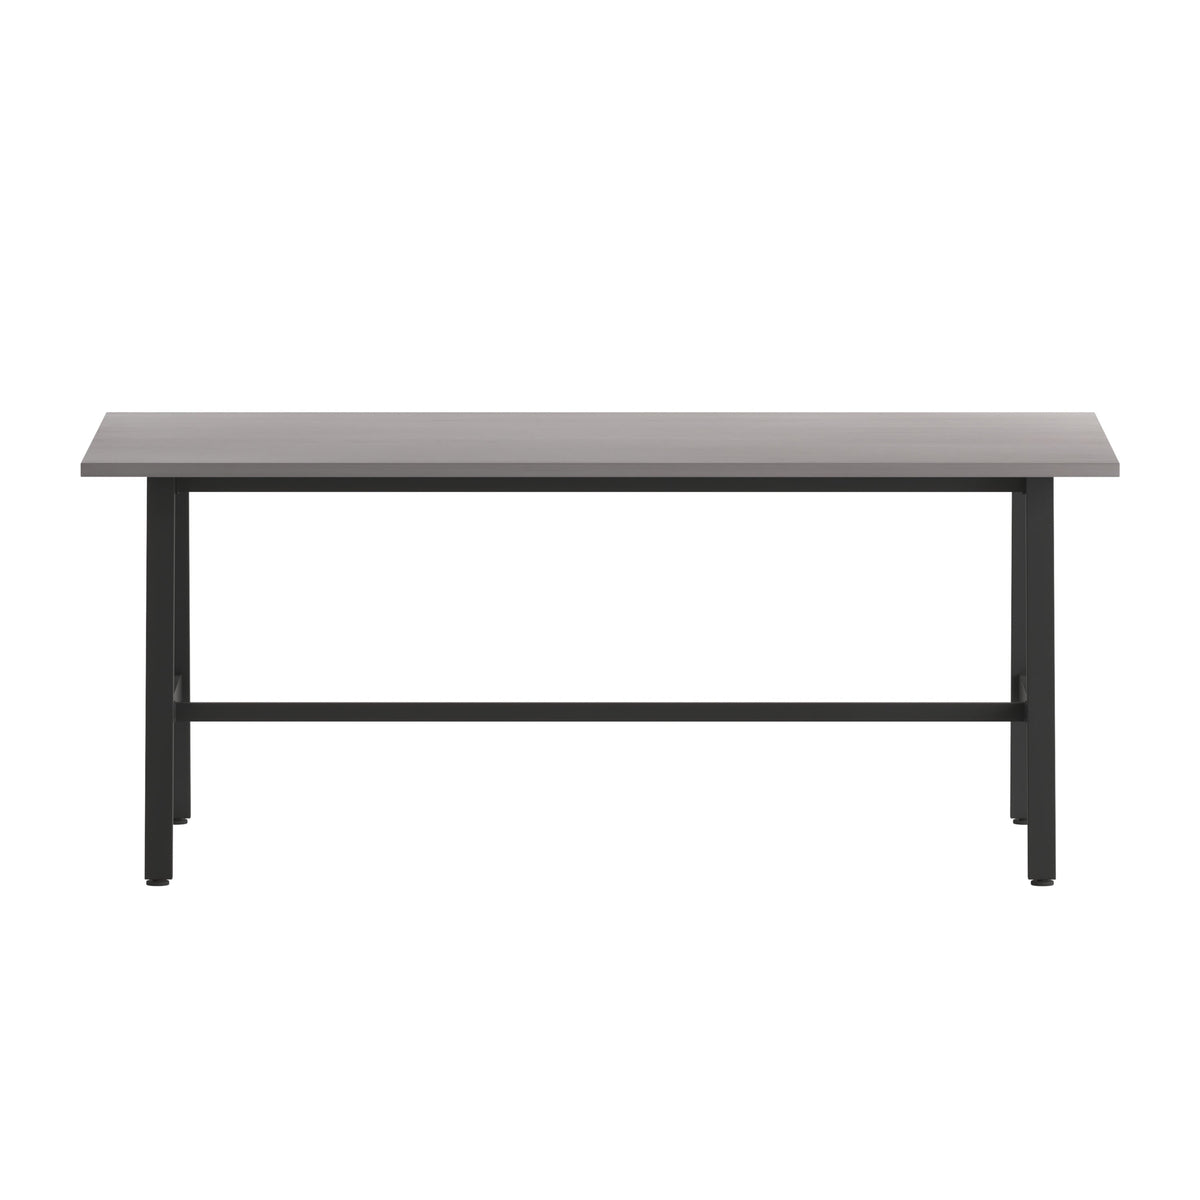 Gray Oak |#| Commercial 72x36 Conference Table with Laminate Top and A-Frame Base - Gray Oak